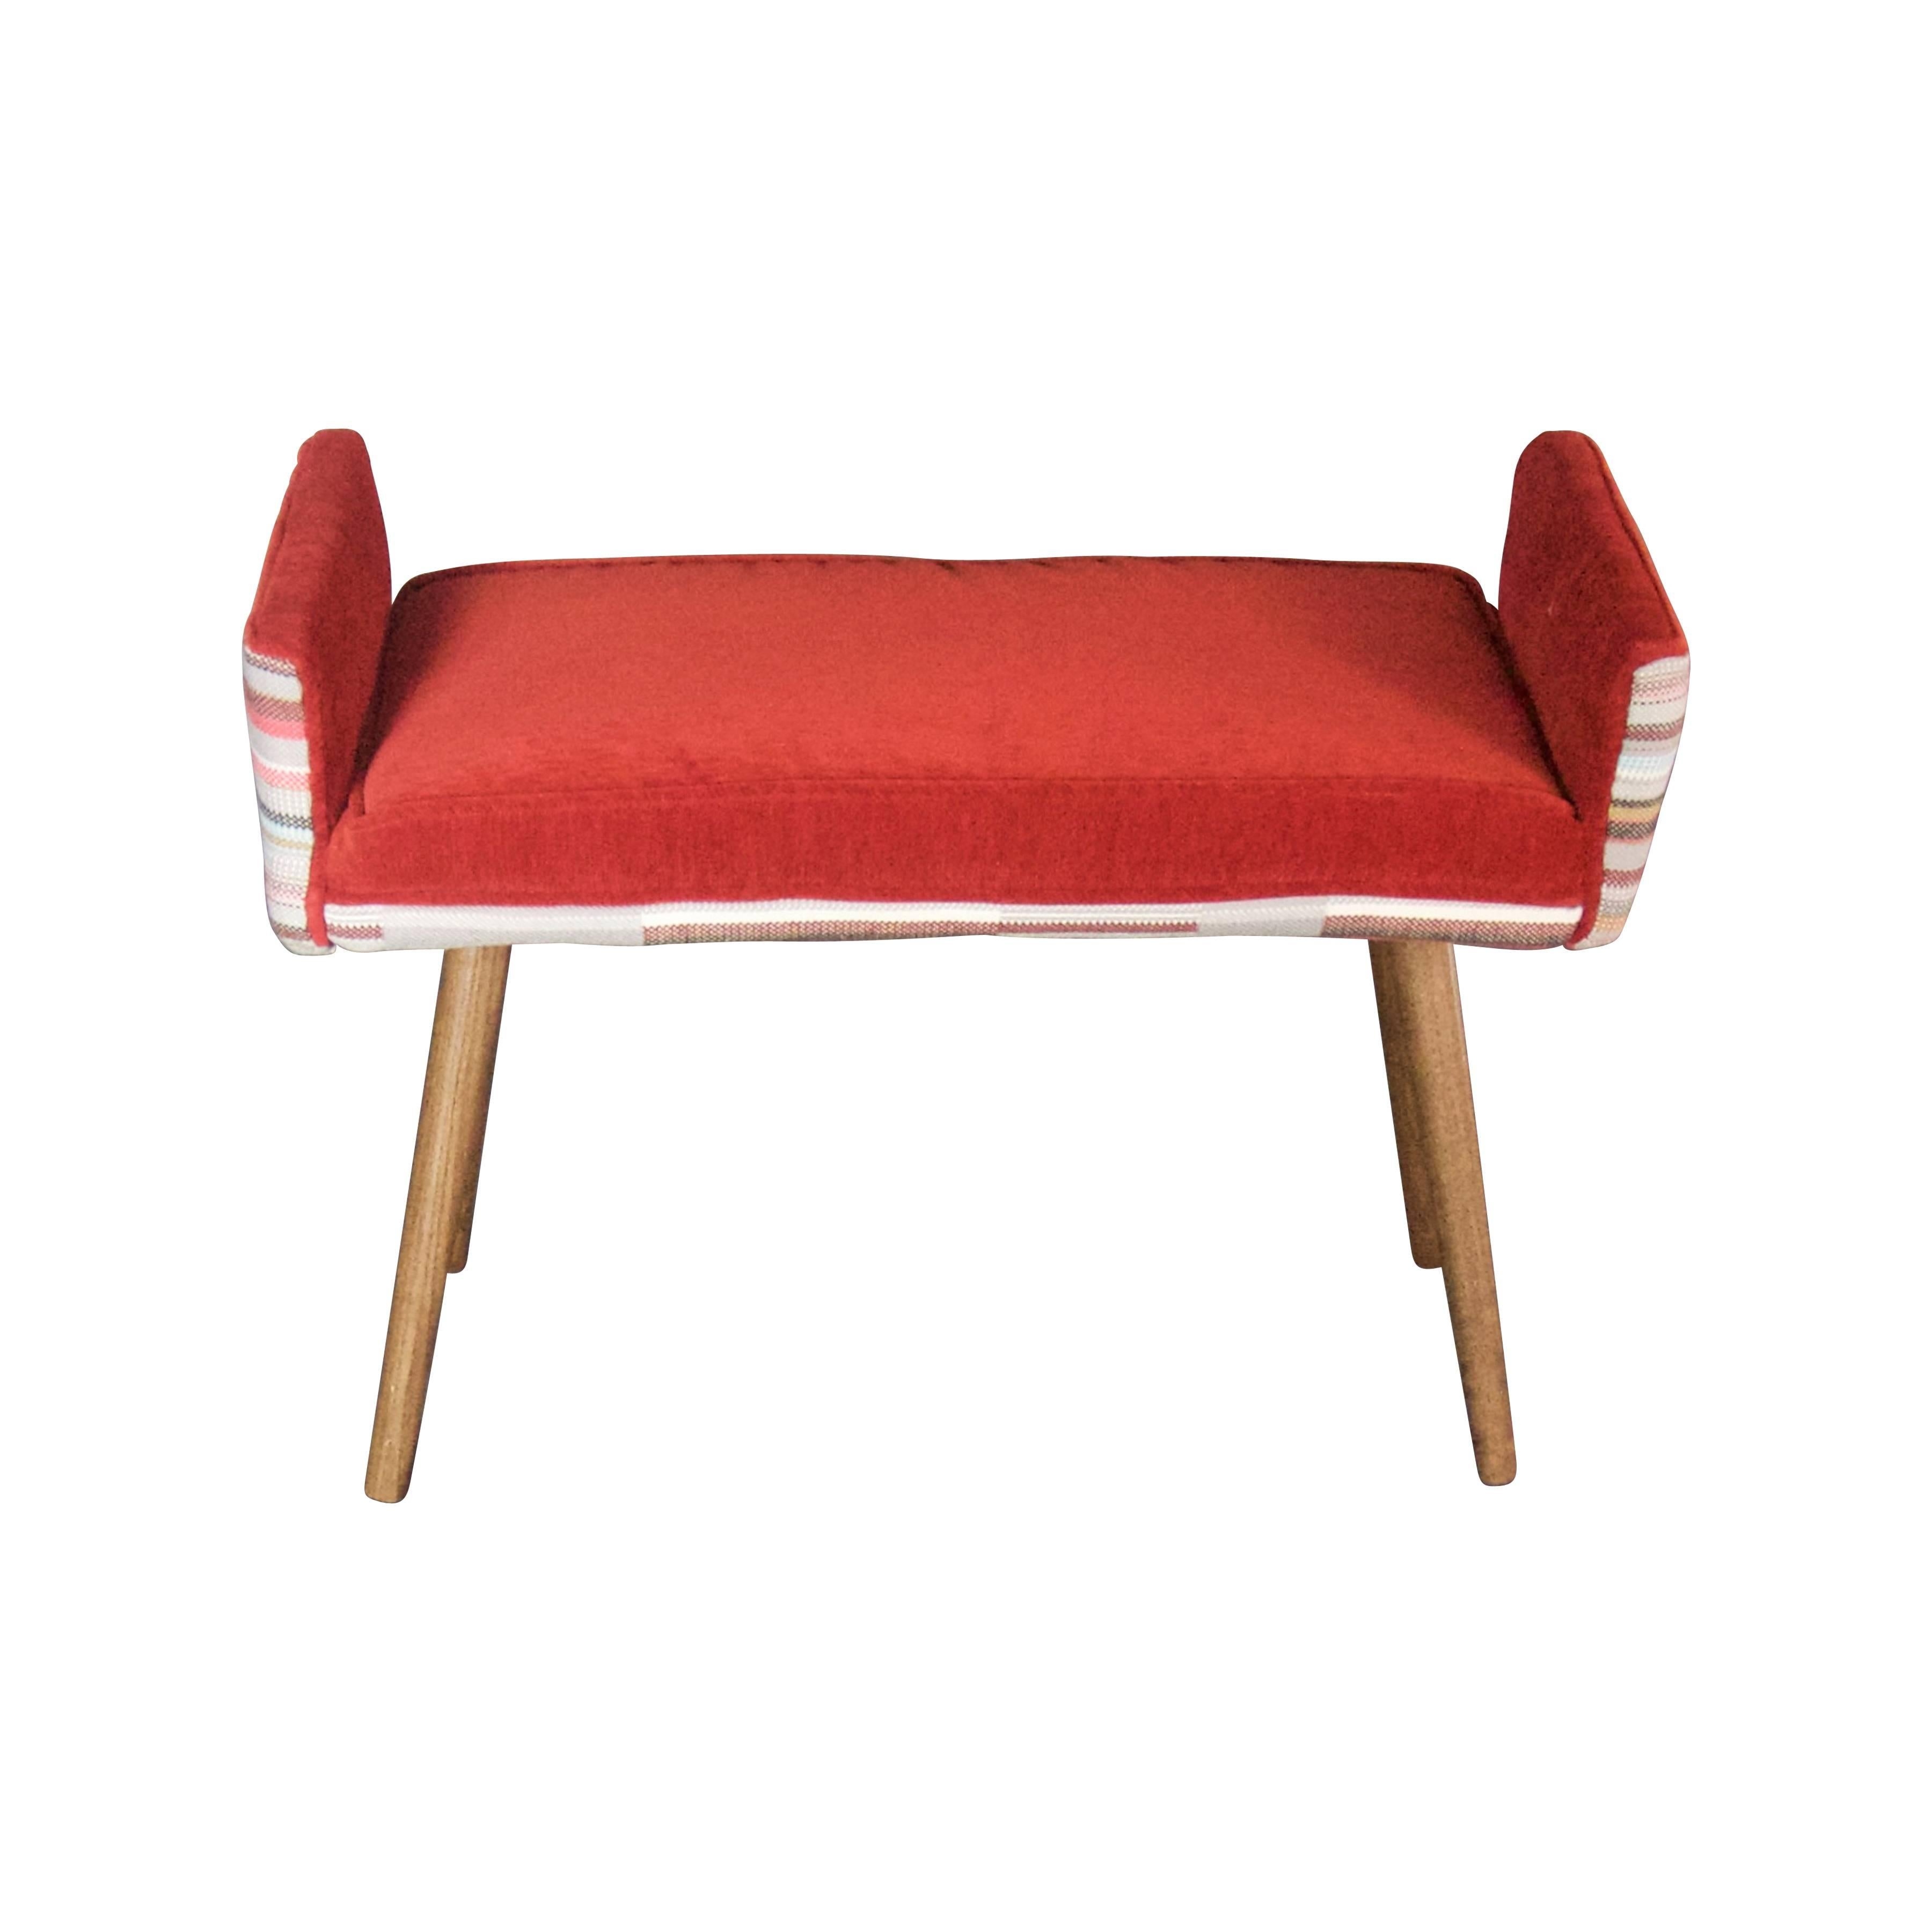 Modern Studio Series: Backless Vanity Size Stool in Gray Geometric with Flame Red Seat For Sale